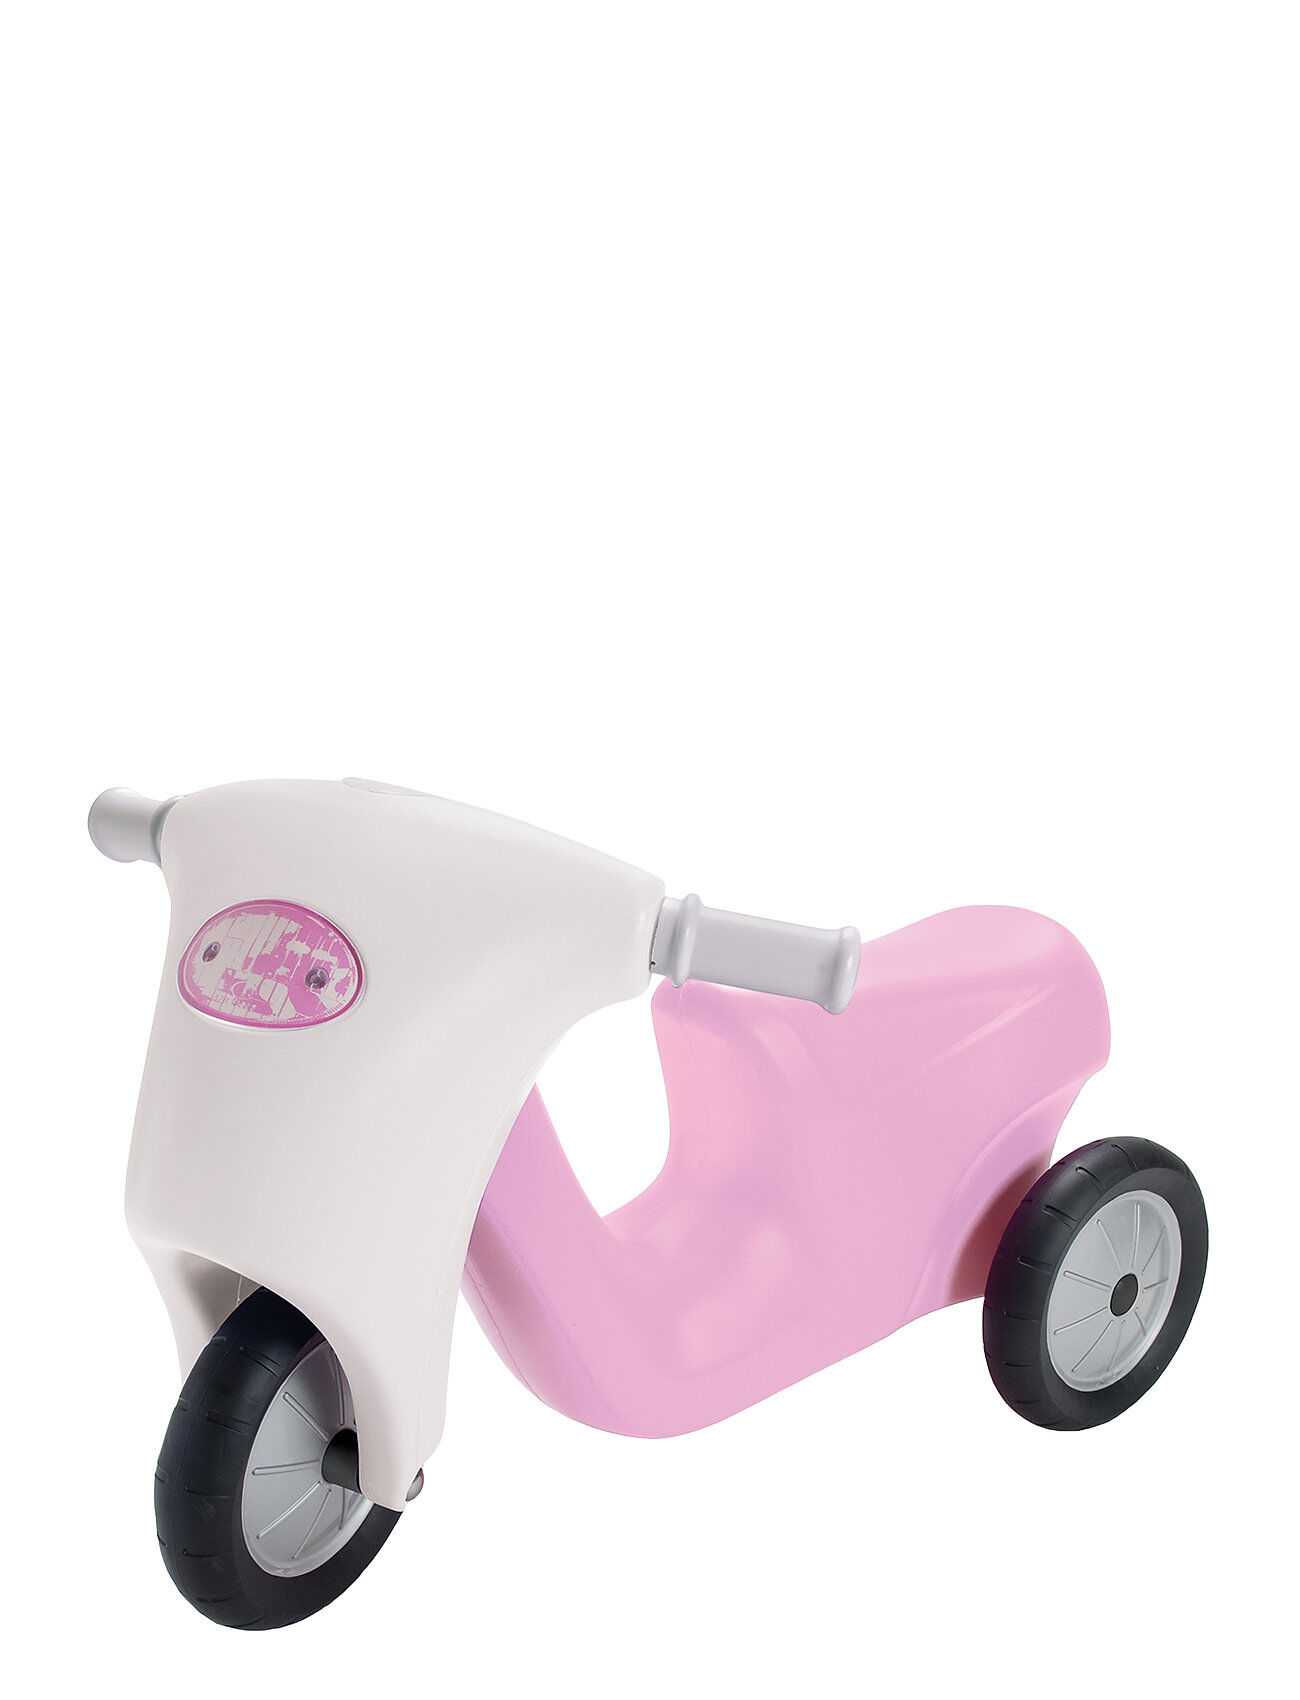 Dantoy My Little P. Scooter W/Rubber-Wheels Toys Ride On Toys Rosa Dantoy